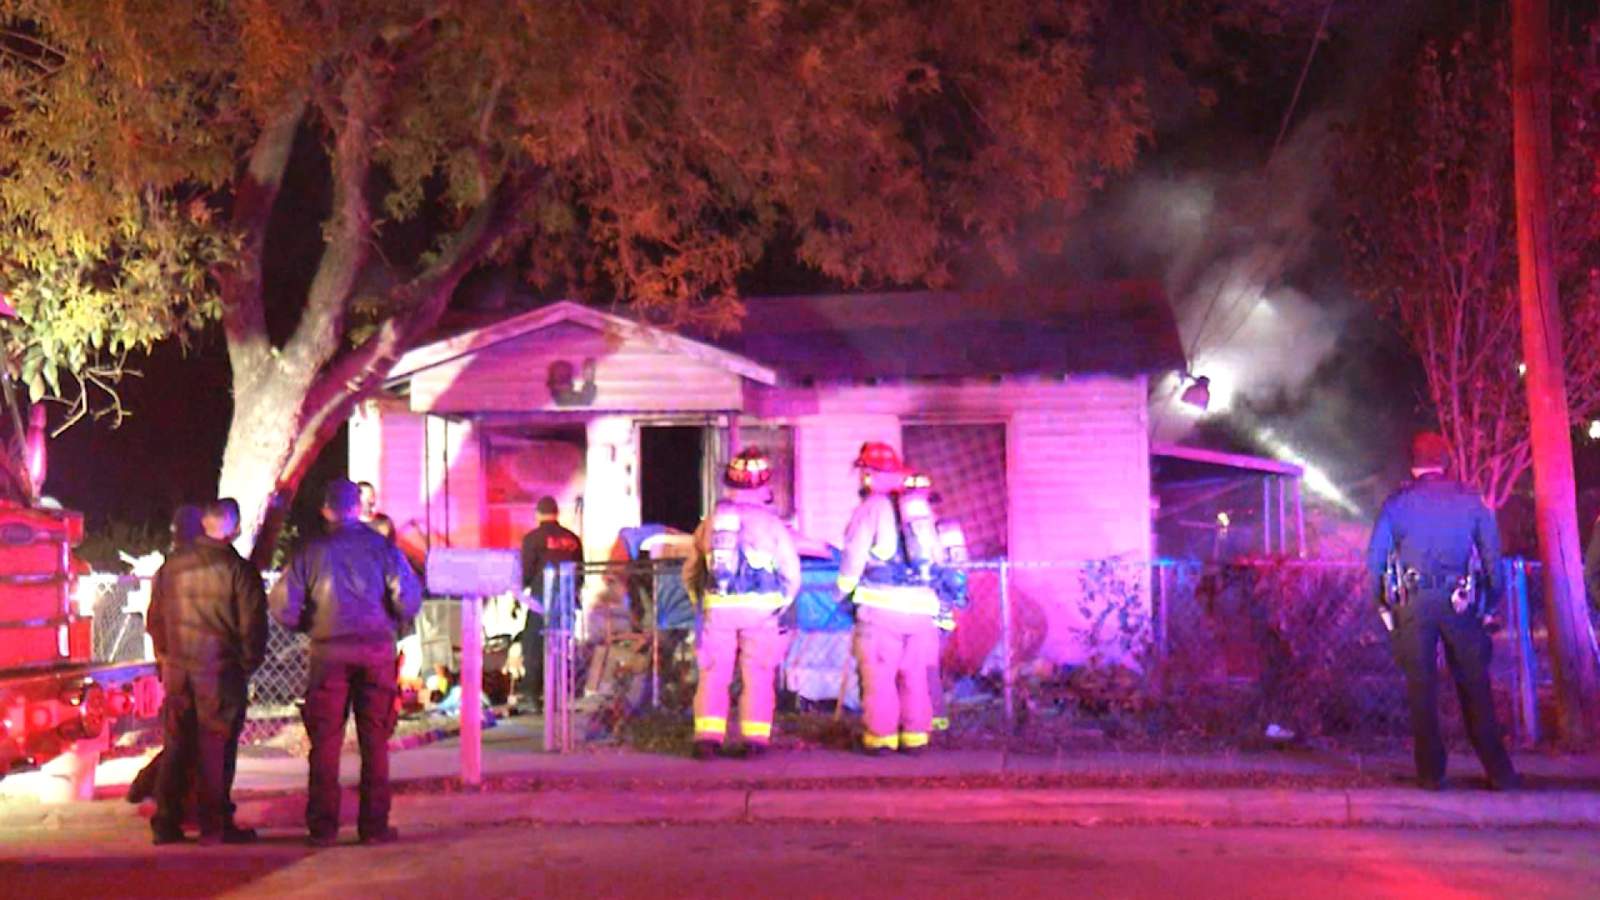 Man accused of setting fire to West Side home after fight with girlfriend